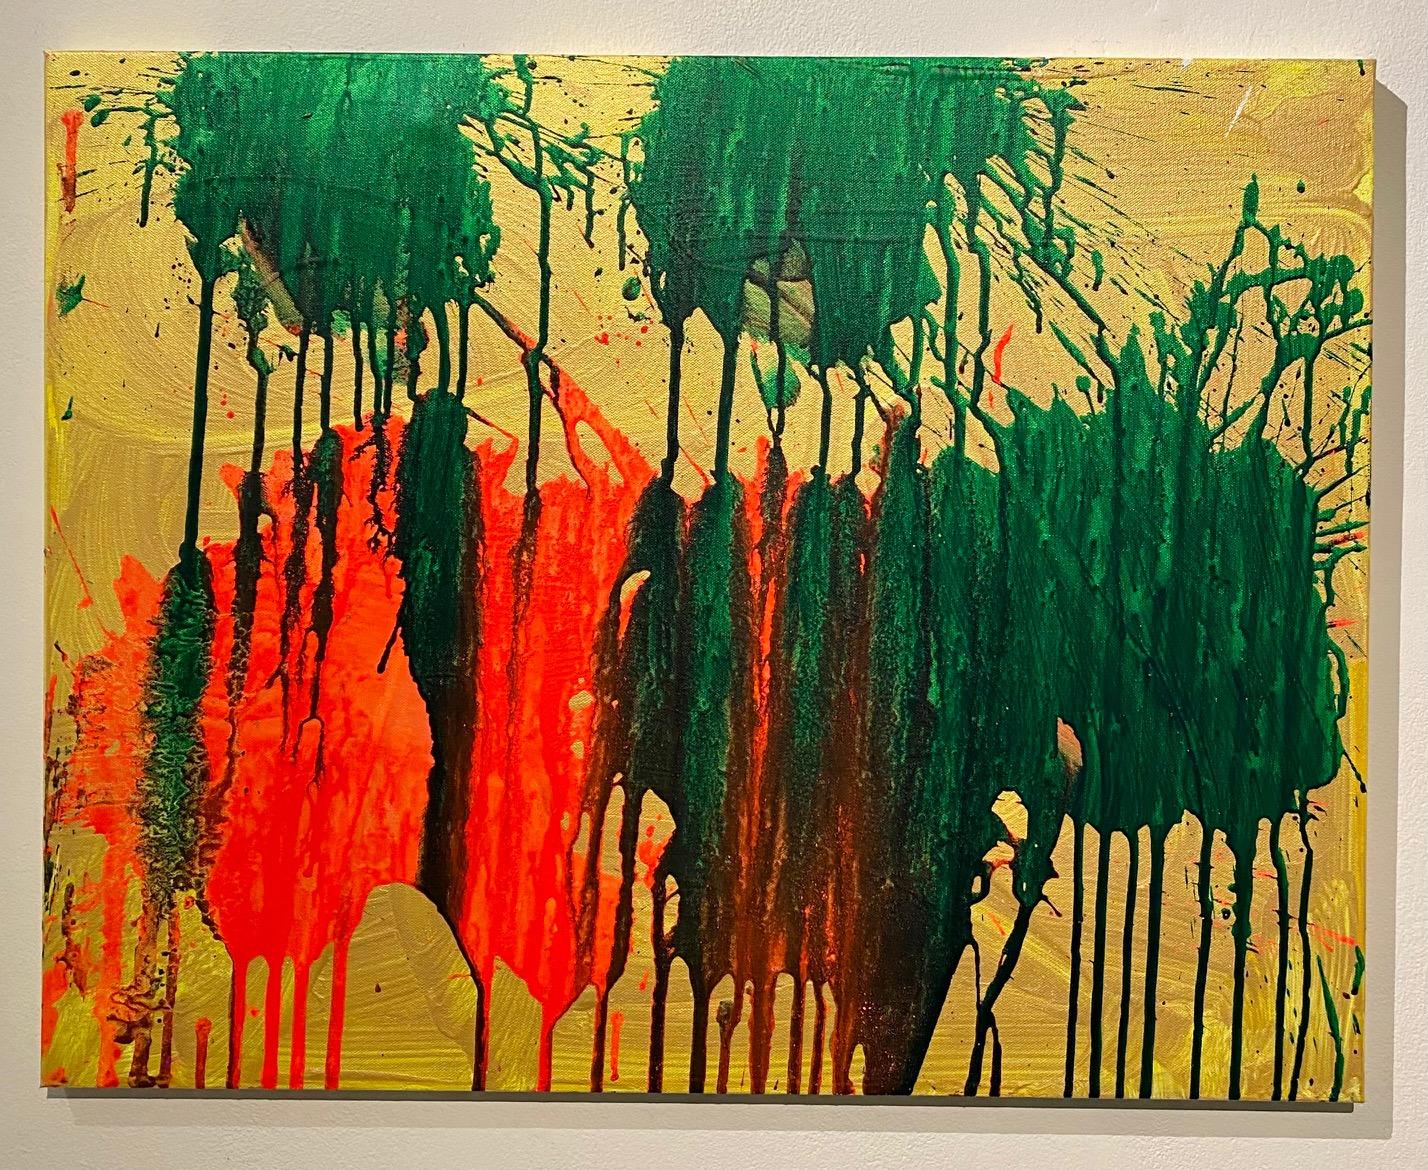 Abstract Painting Ushio Shinohara - « Red and Green on Gold », acrylique sur toile - peinture abstraite de boxe